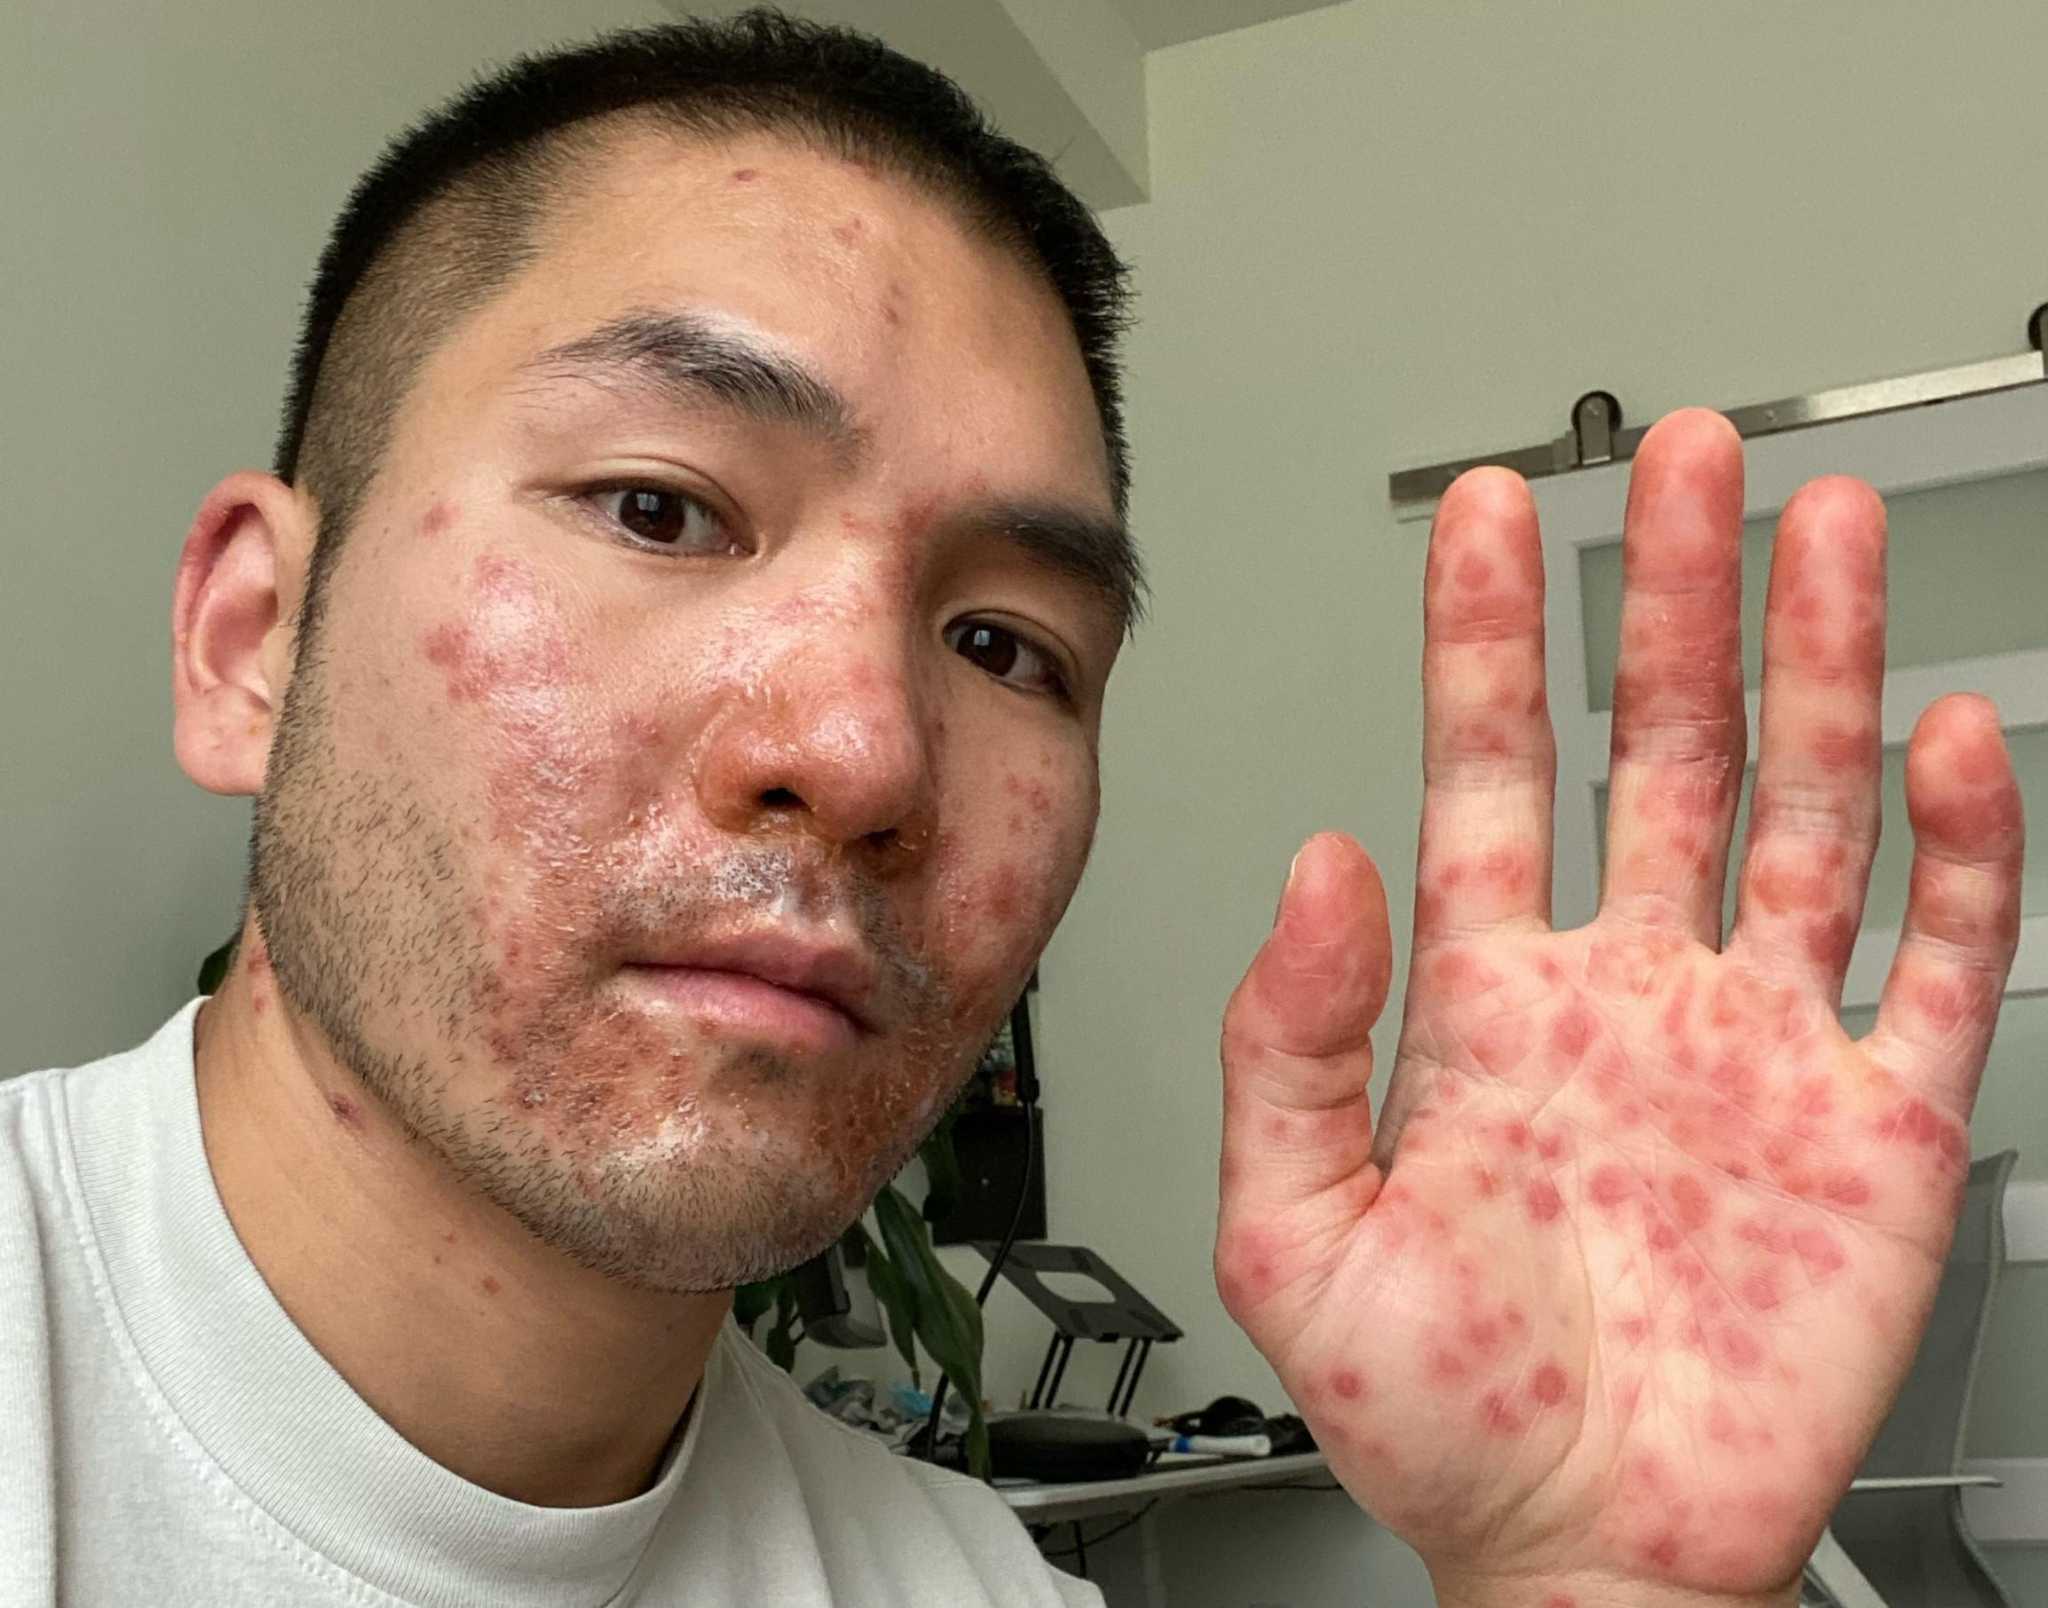 A Bay Area man’s monkeypox diagnosis was ‘painful and terrifying’